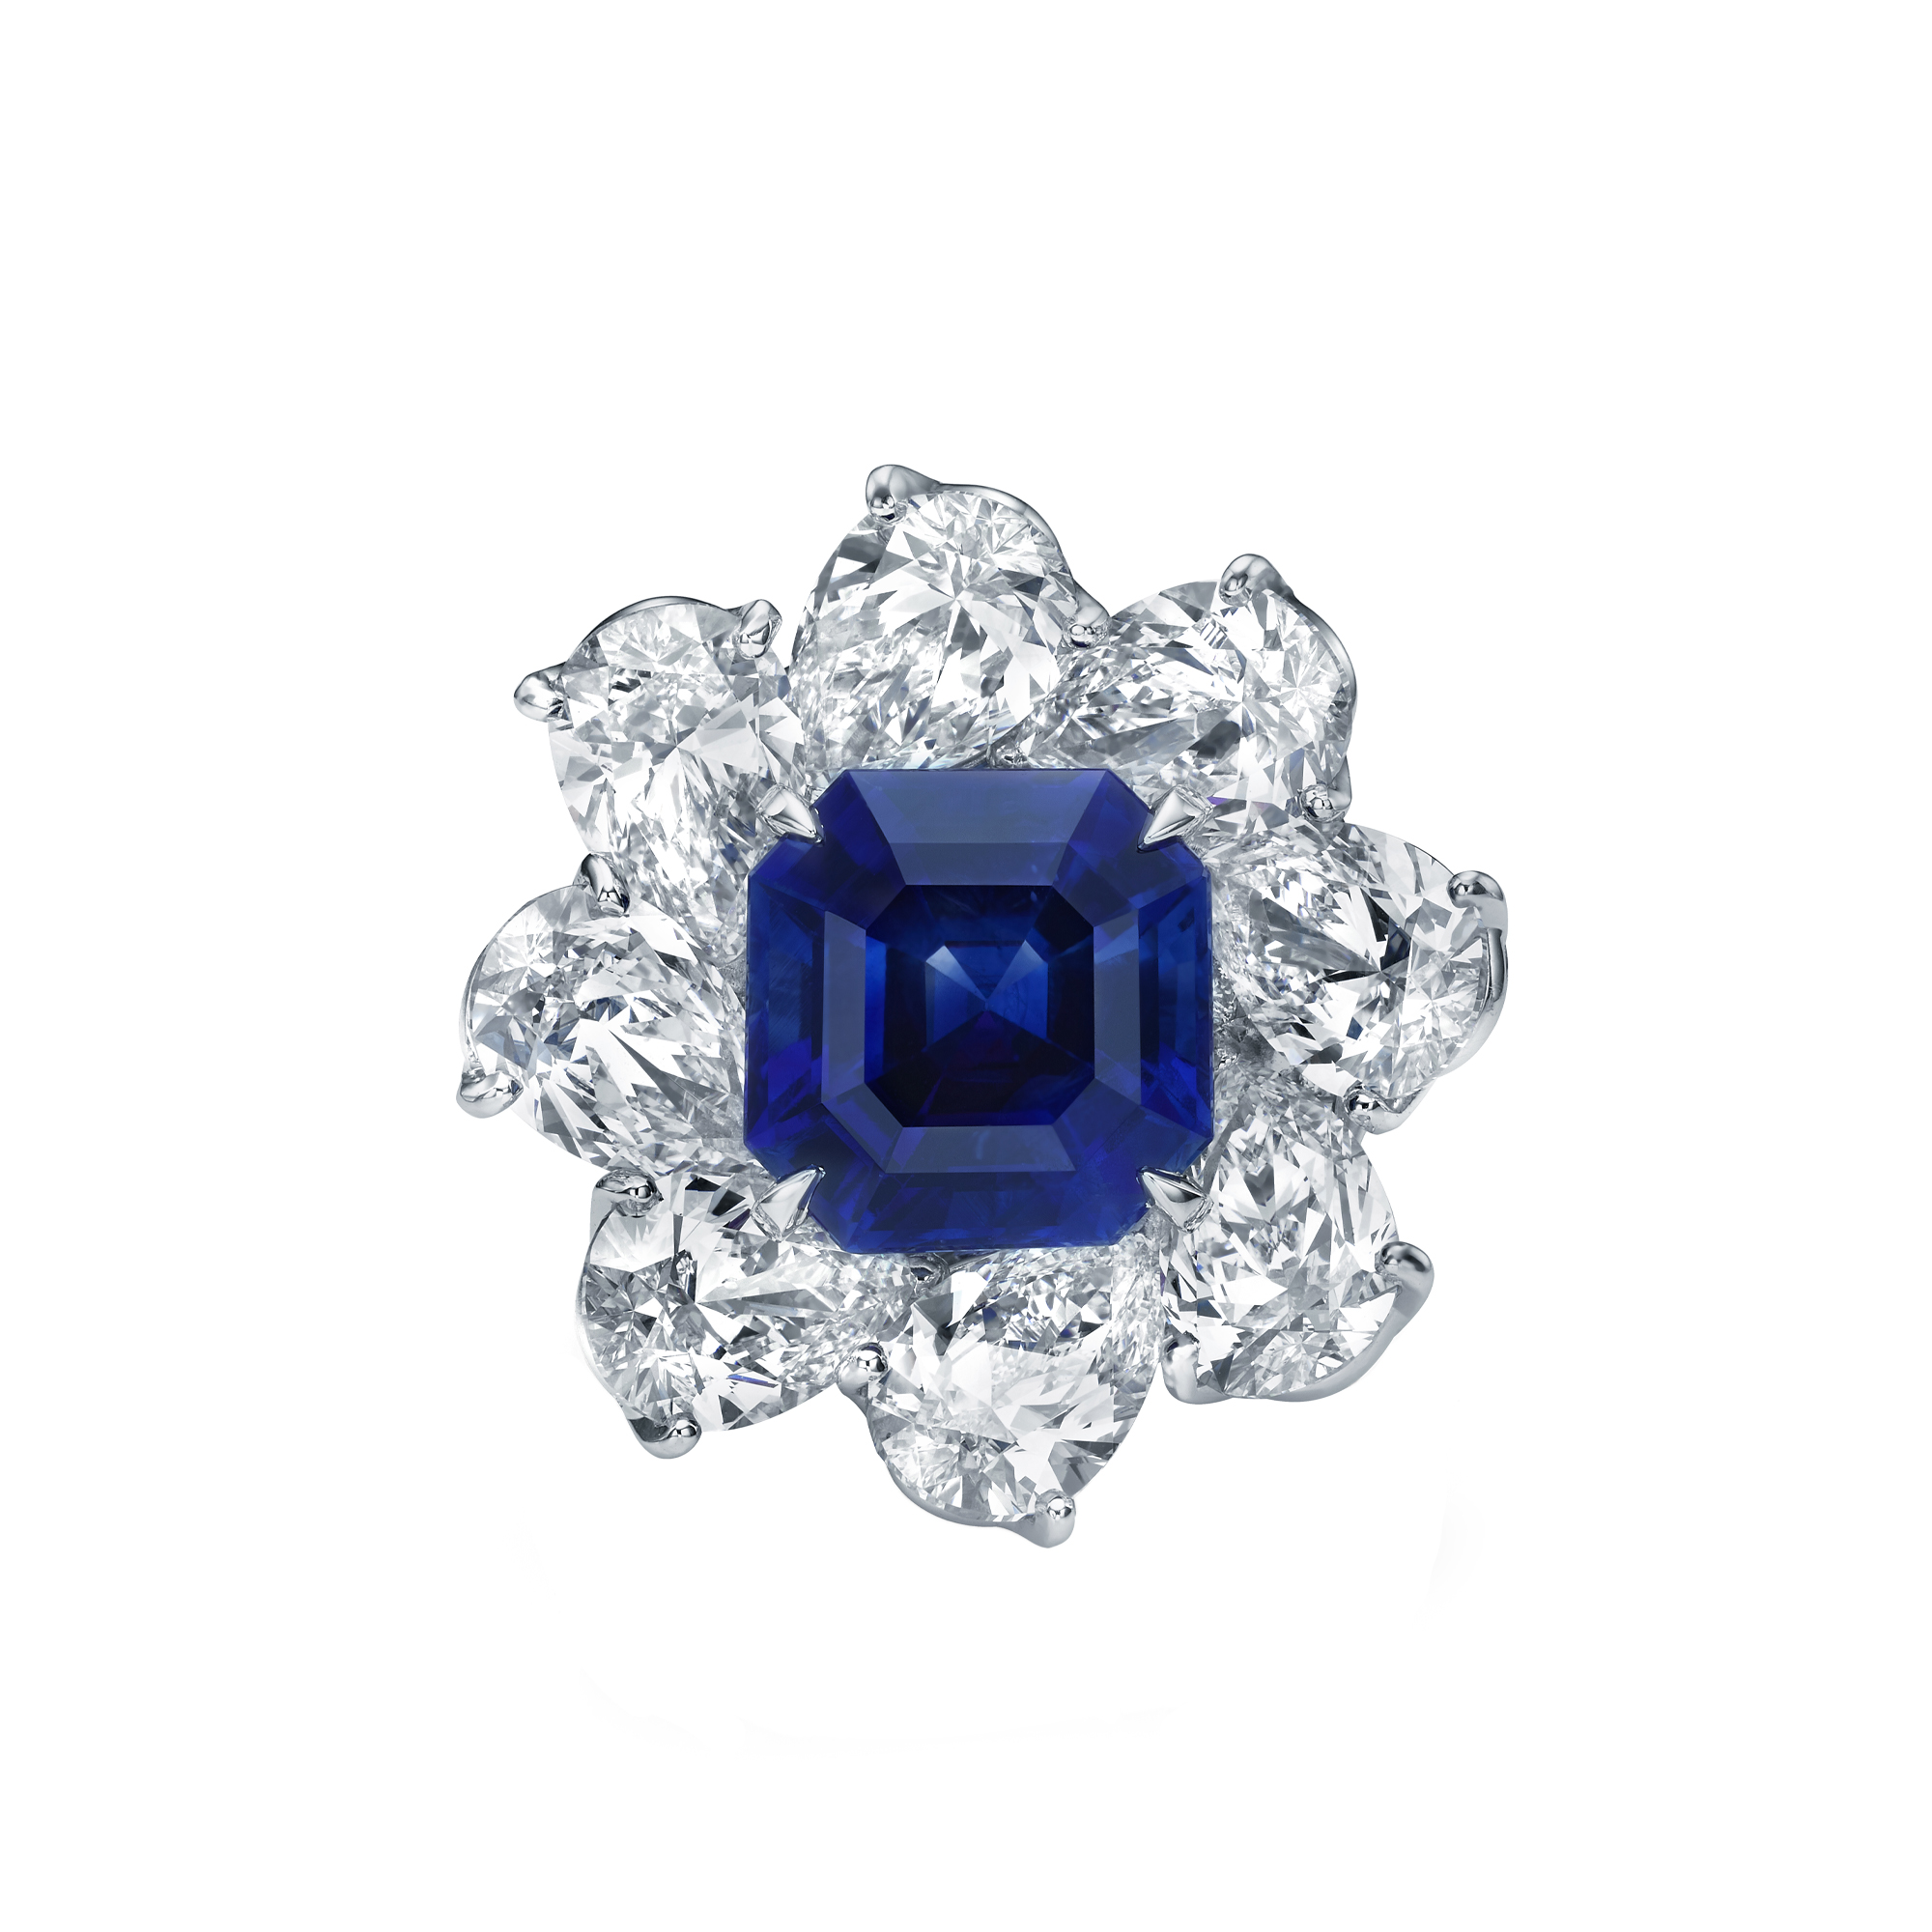 September 2018 Important Jewels Auction | FORTUNA®